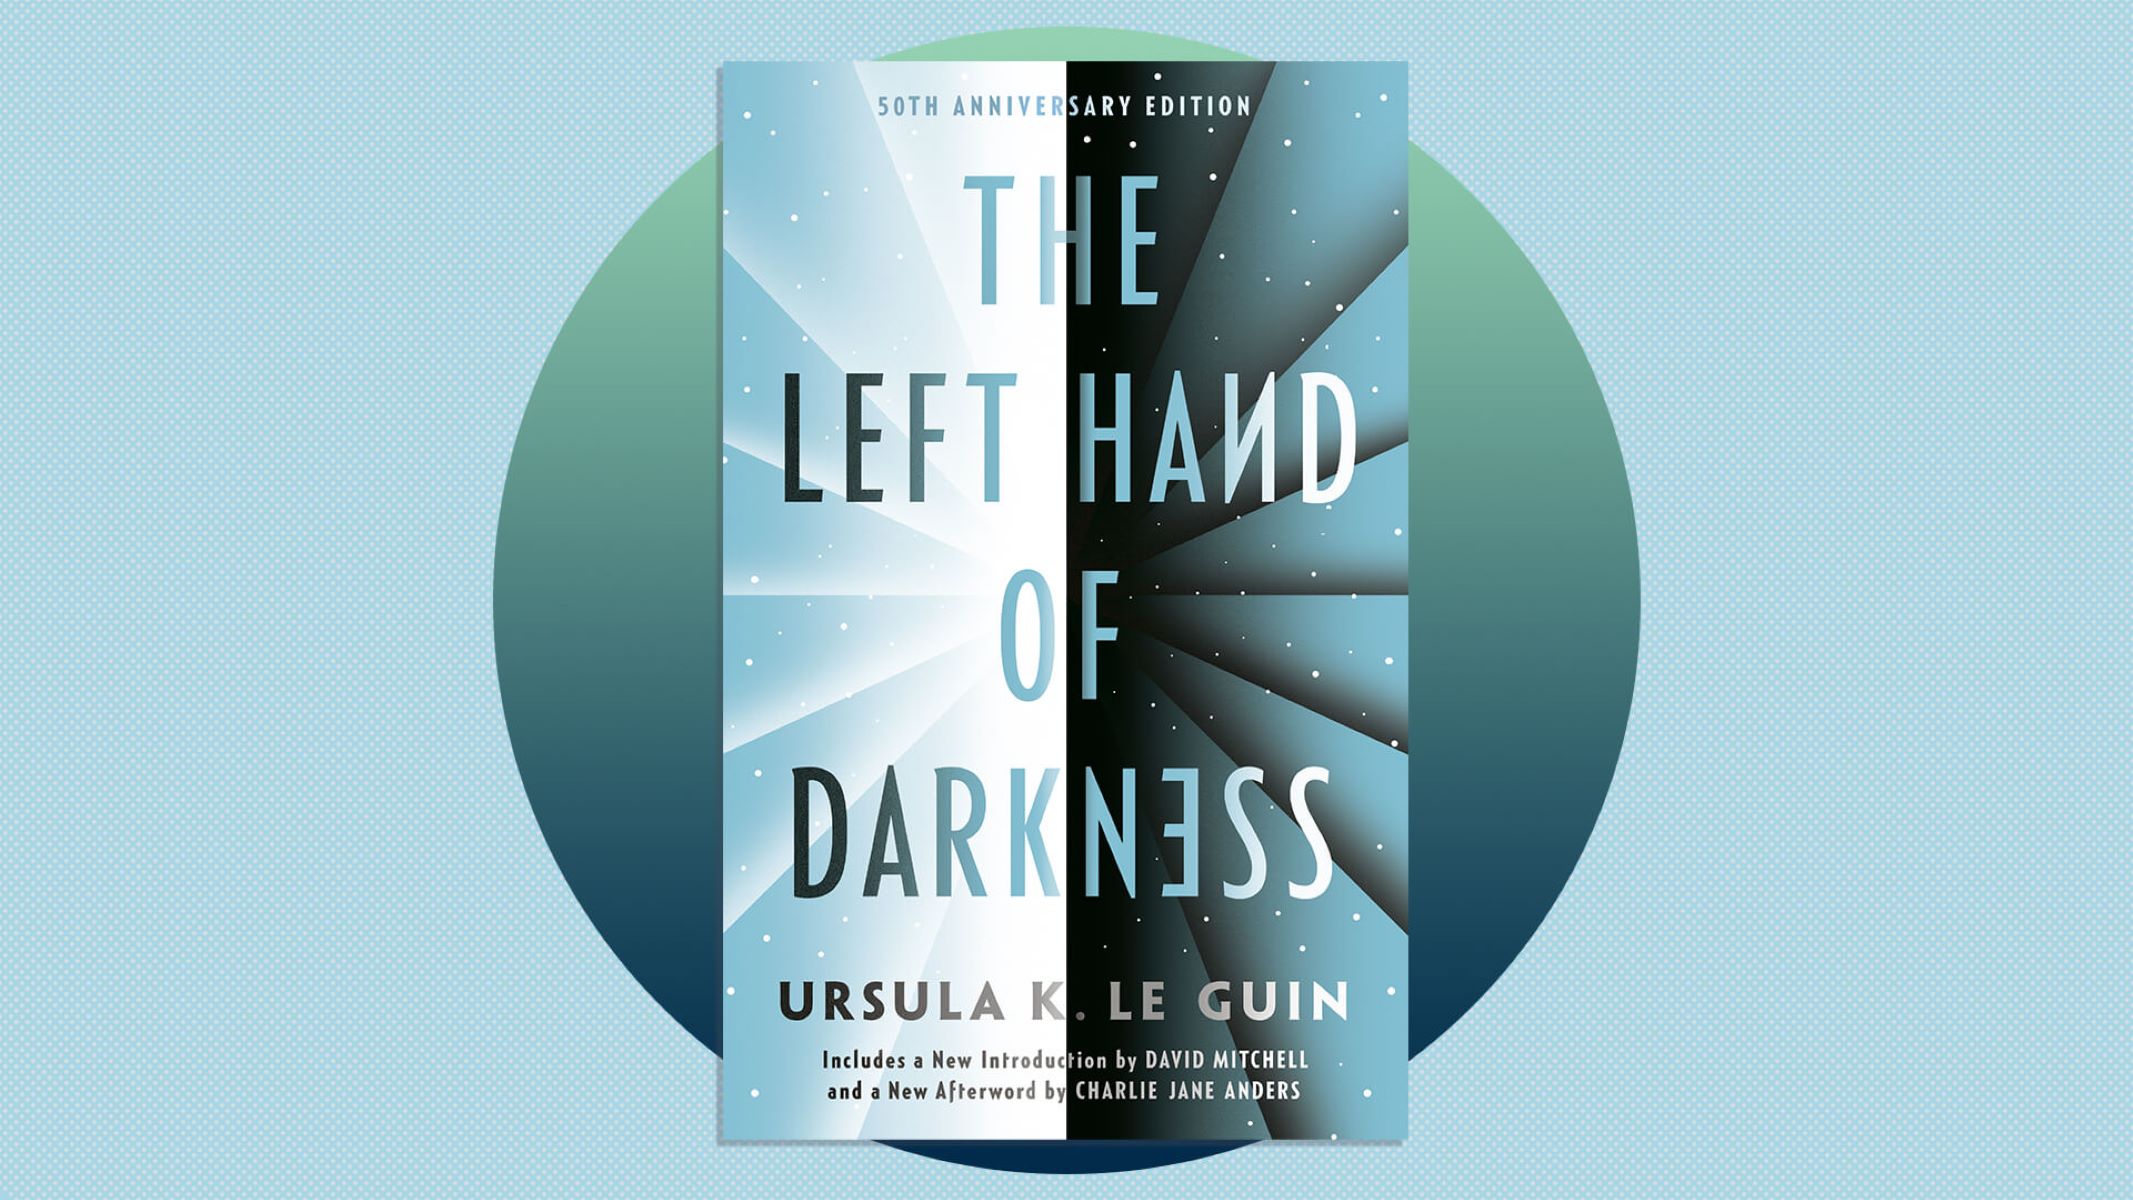 18-fascinating-facts-about-the-left-hand-of-darkness-ursula-k-le-guin